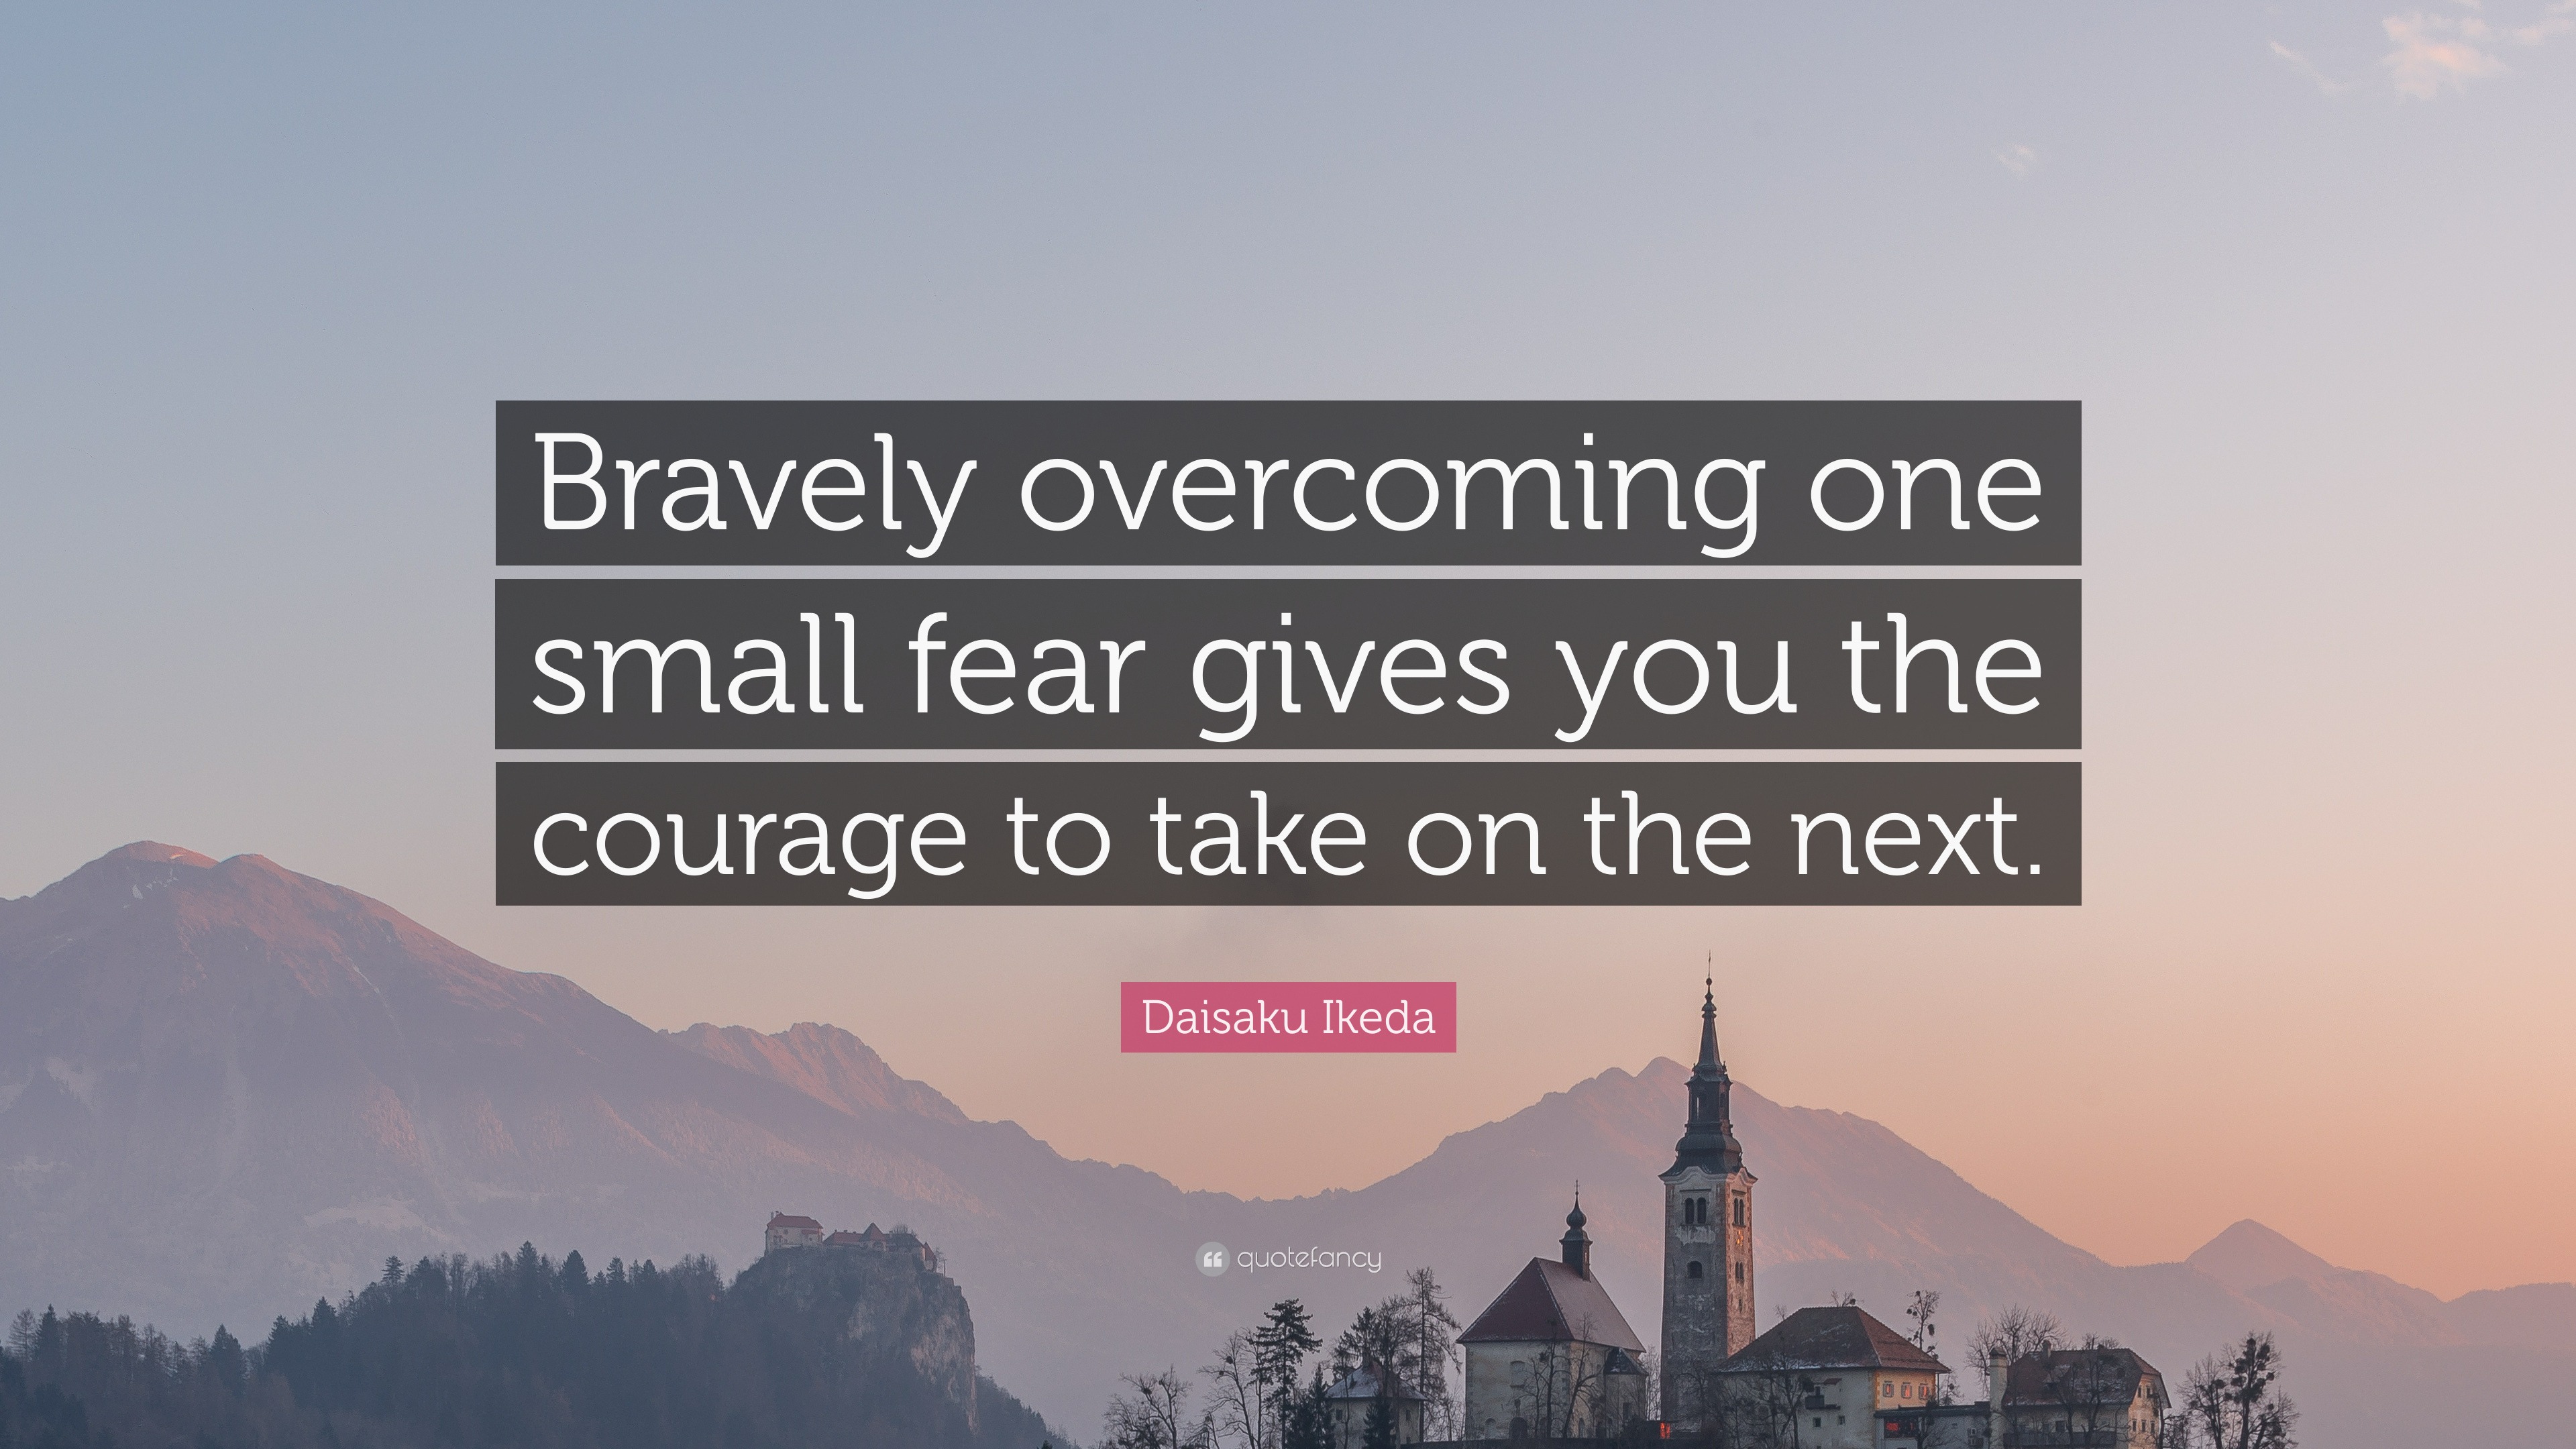 Daisaku Ikeda Quote: “Bravely overcoming one small fear gives you the ...